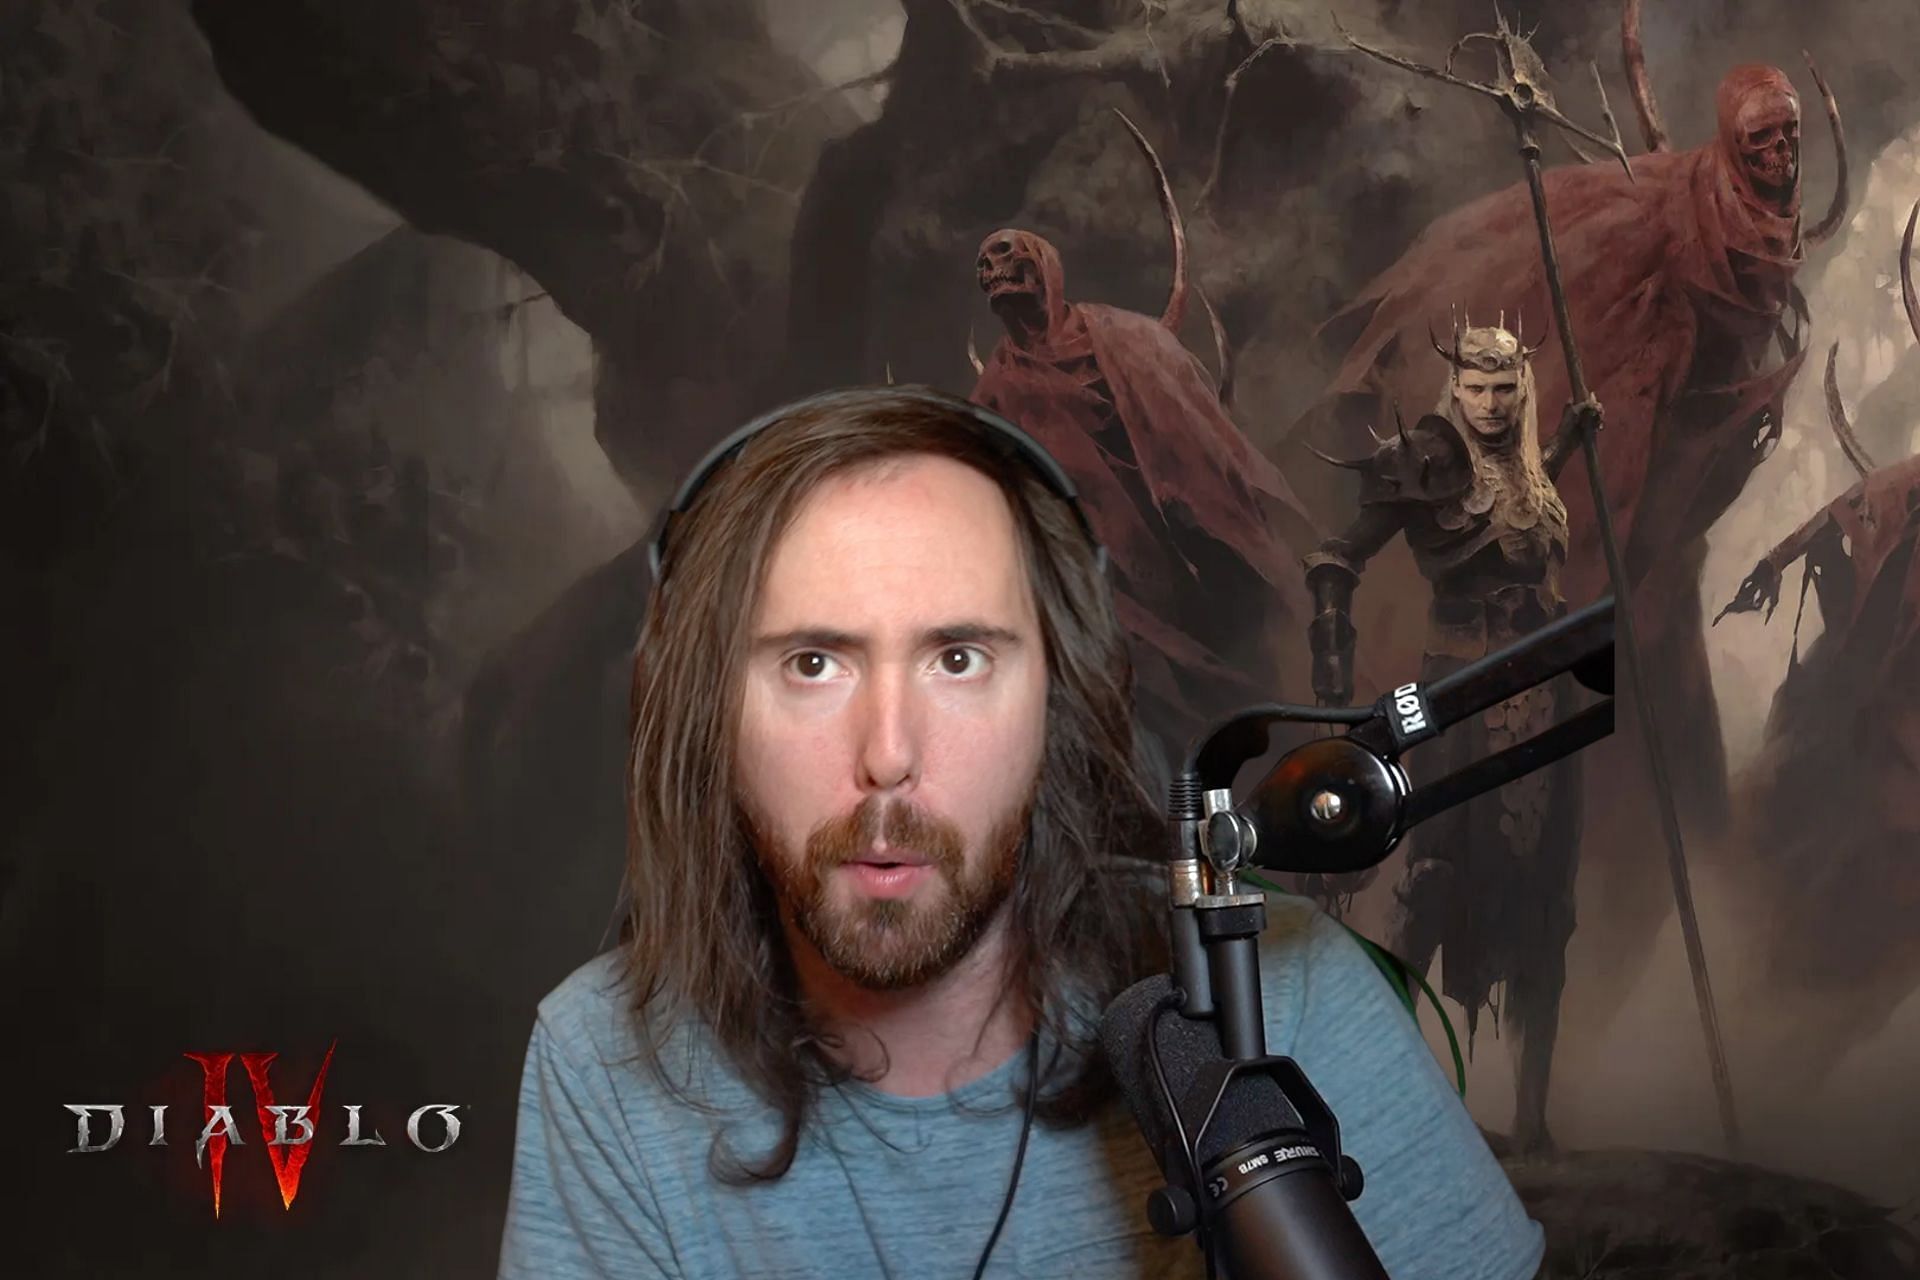 Asmongold was happy that Diablo 4 would not use any pay-to-win systems (Image via Sportskeeda)